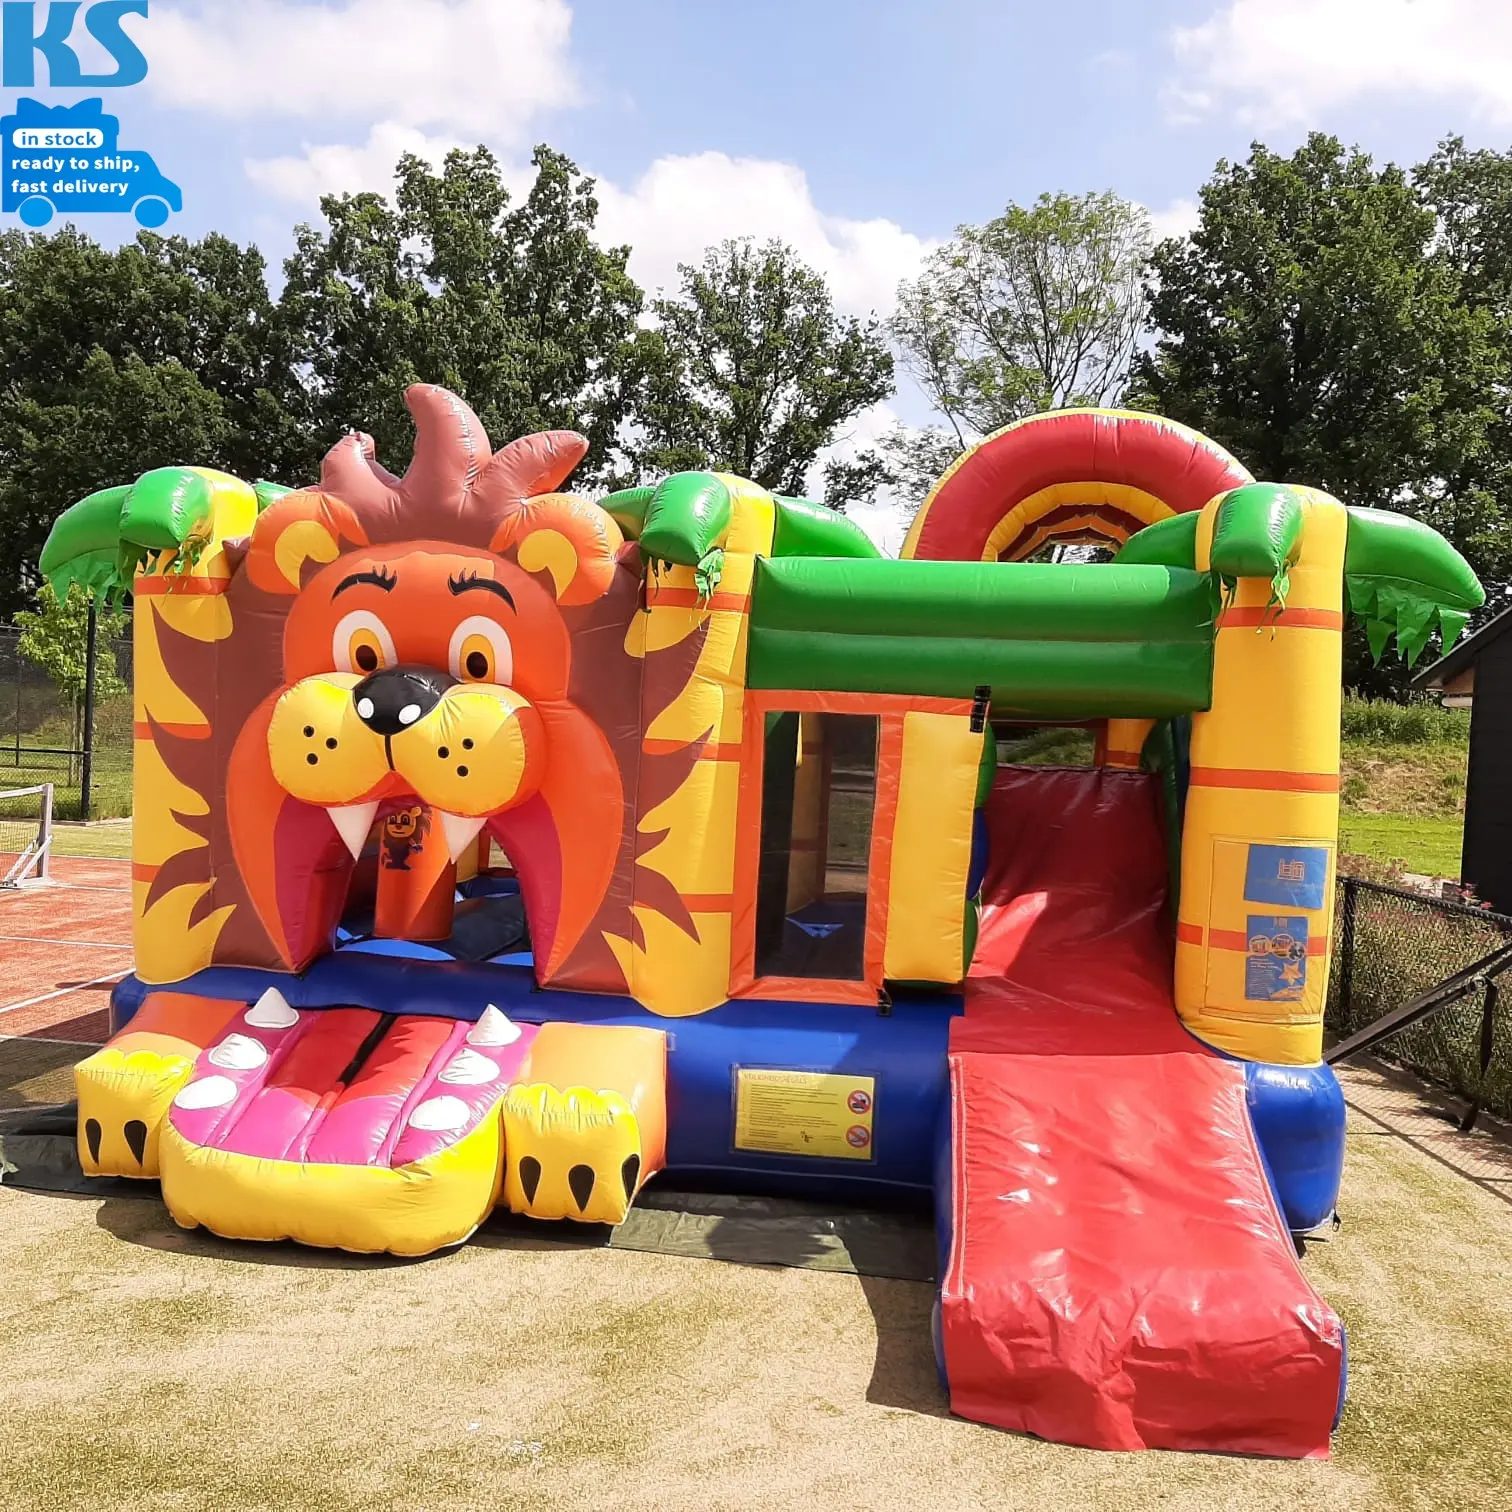 Outdoor Kids Party Commercial PVC Jungle Safari Lion King Bounce House Jumping Bouncy Castle Inflatable Bouncer With Slide